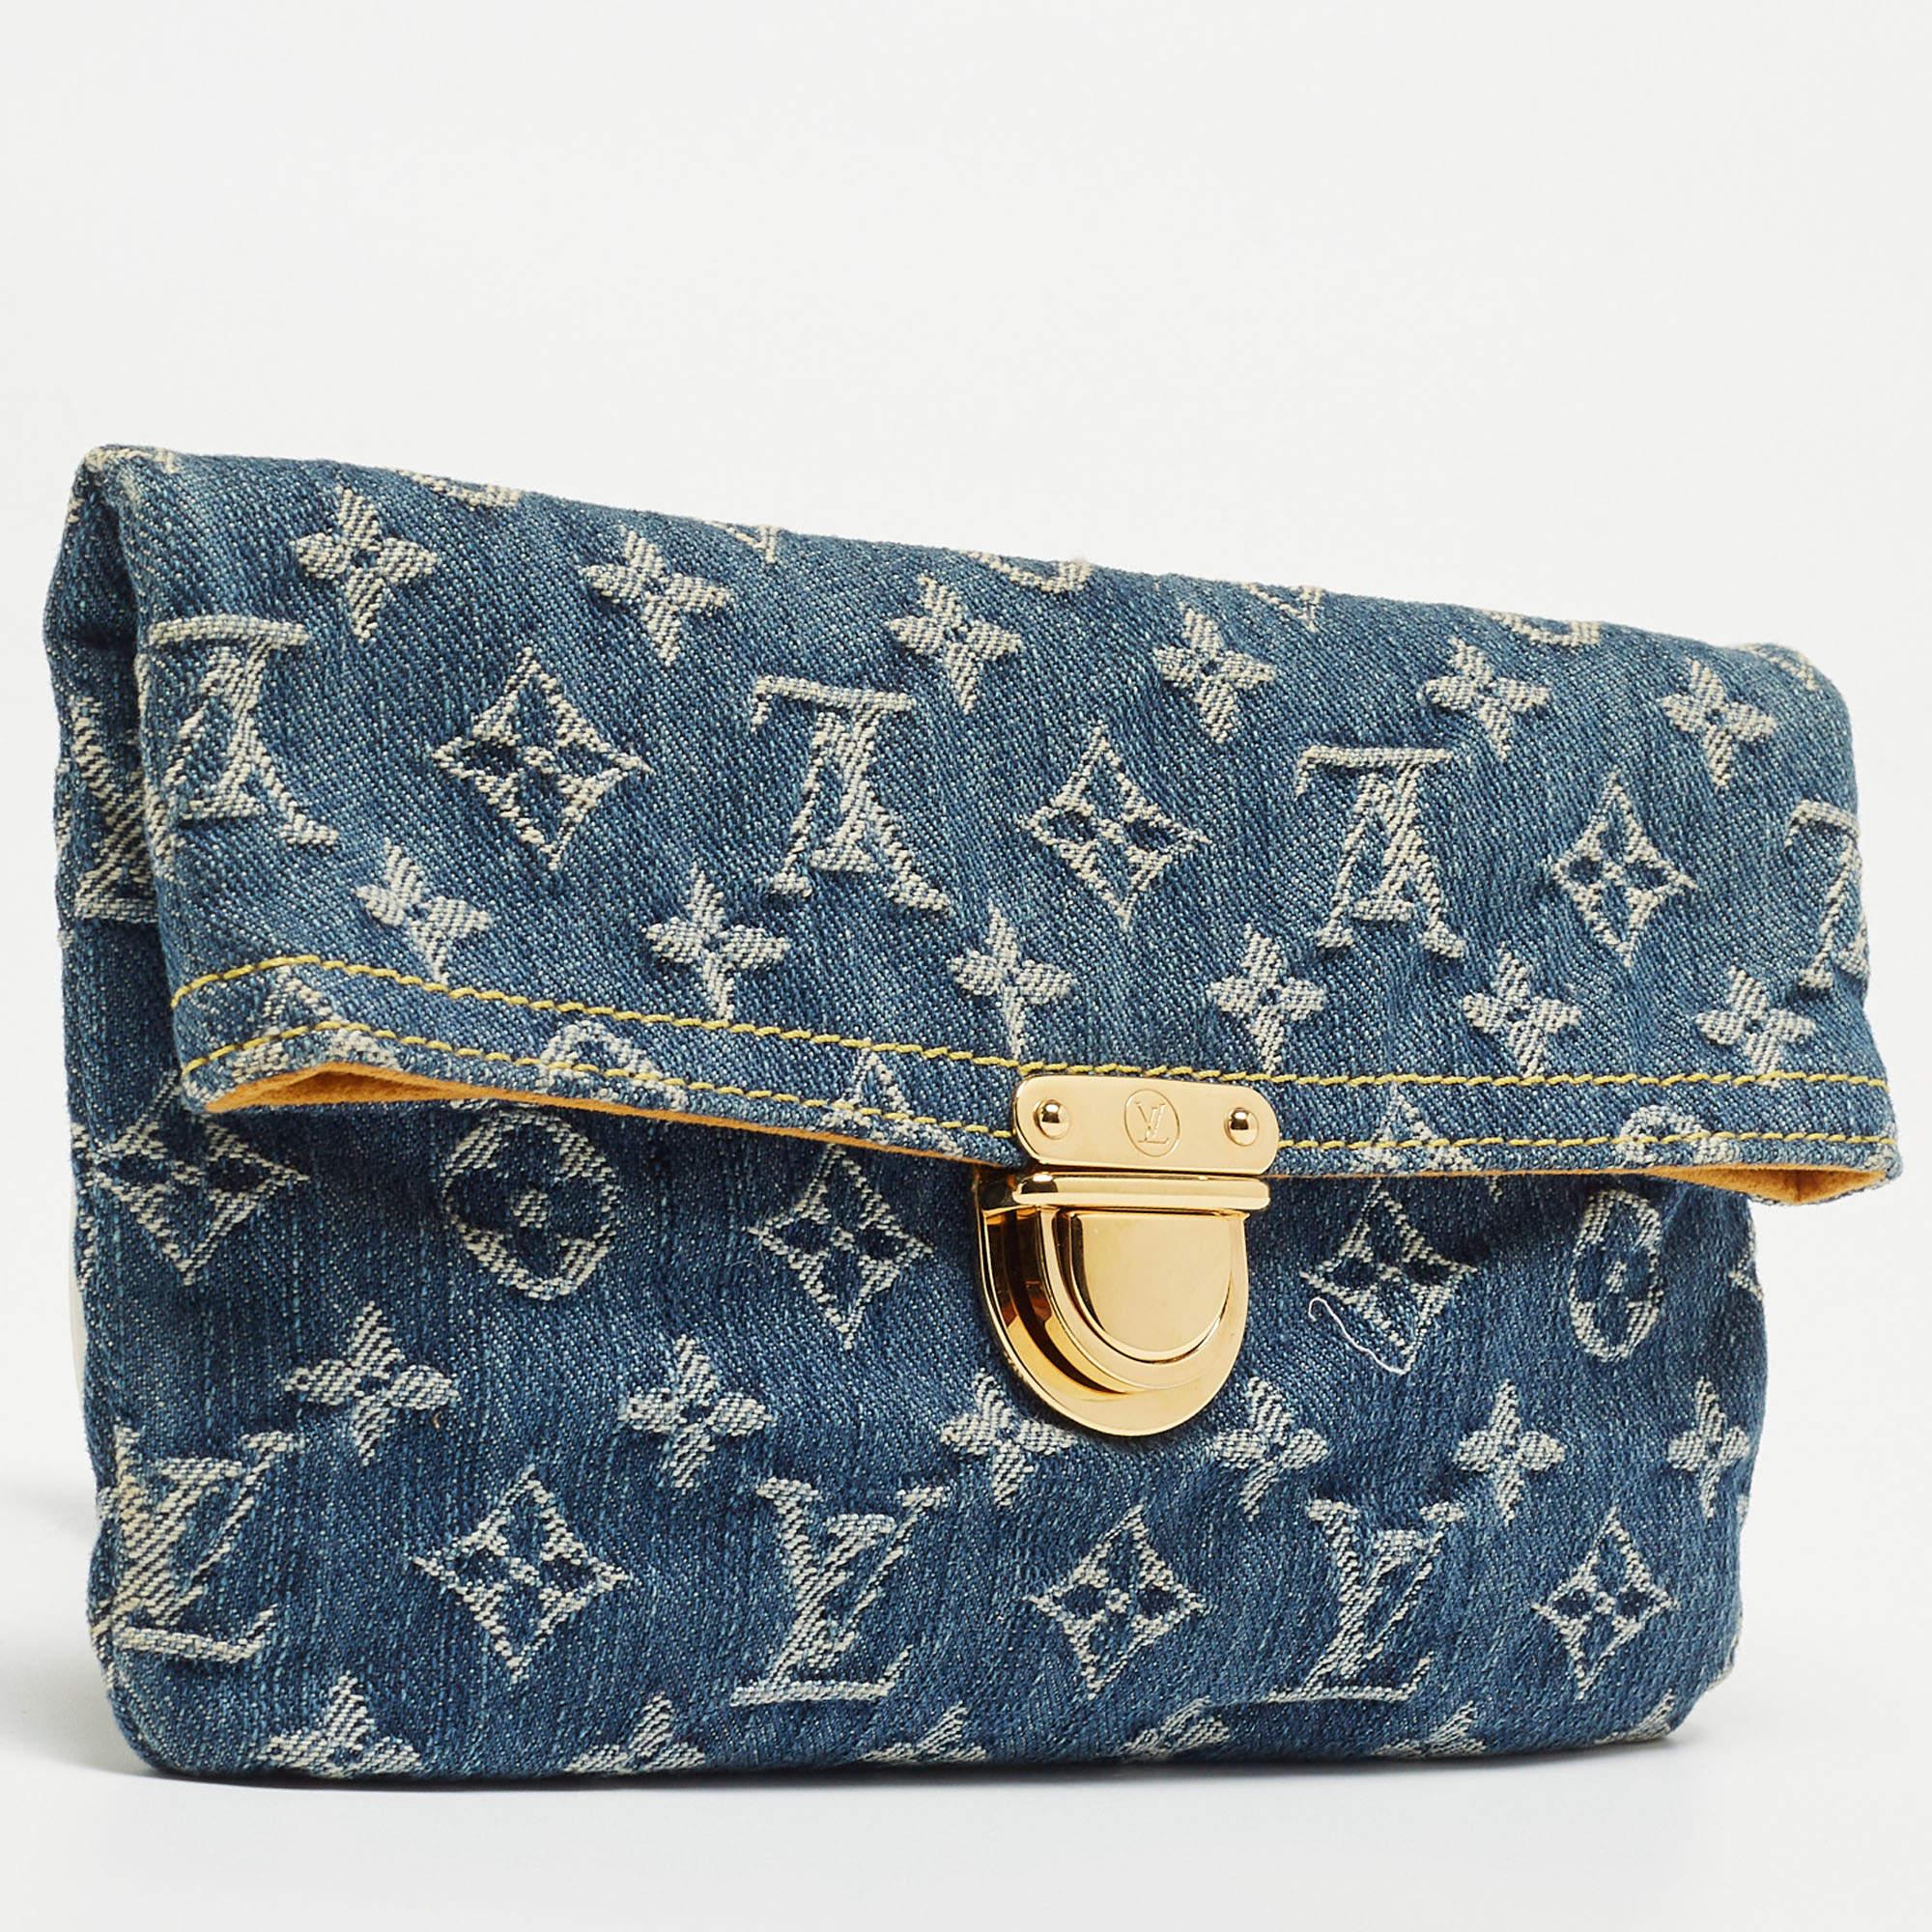 This LV denim clutch for women has the kind of design that ensures high appeal, whether held in your hand or tucked under your arm. It is a meticulously-crafted piece bound to last a long time.

